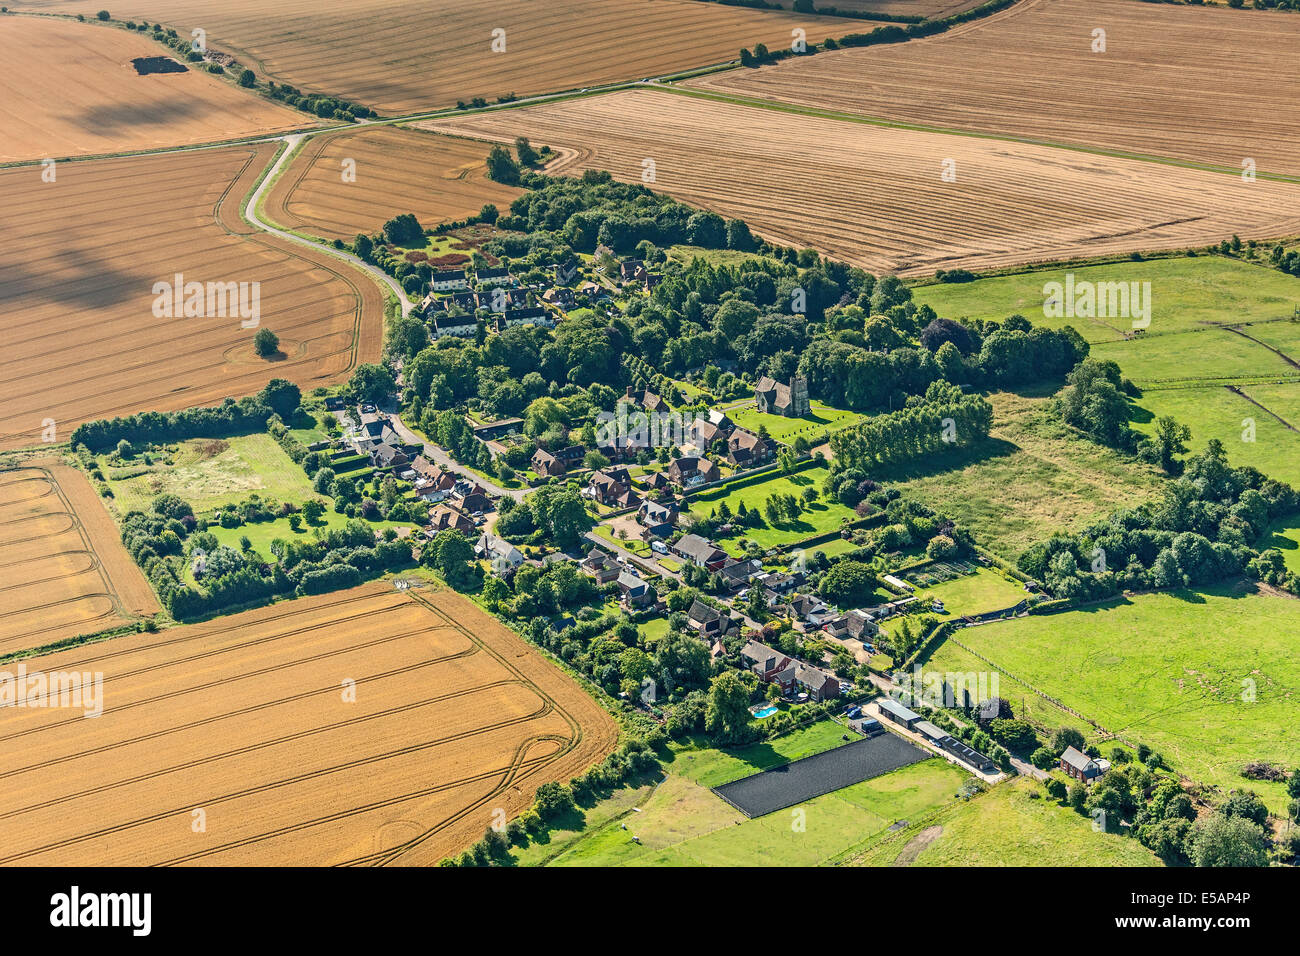 Aerial view of the village of Winterbourne Bassett, Wiltshire, UK. JMH6174 Stock Photo